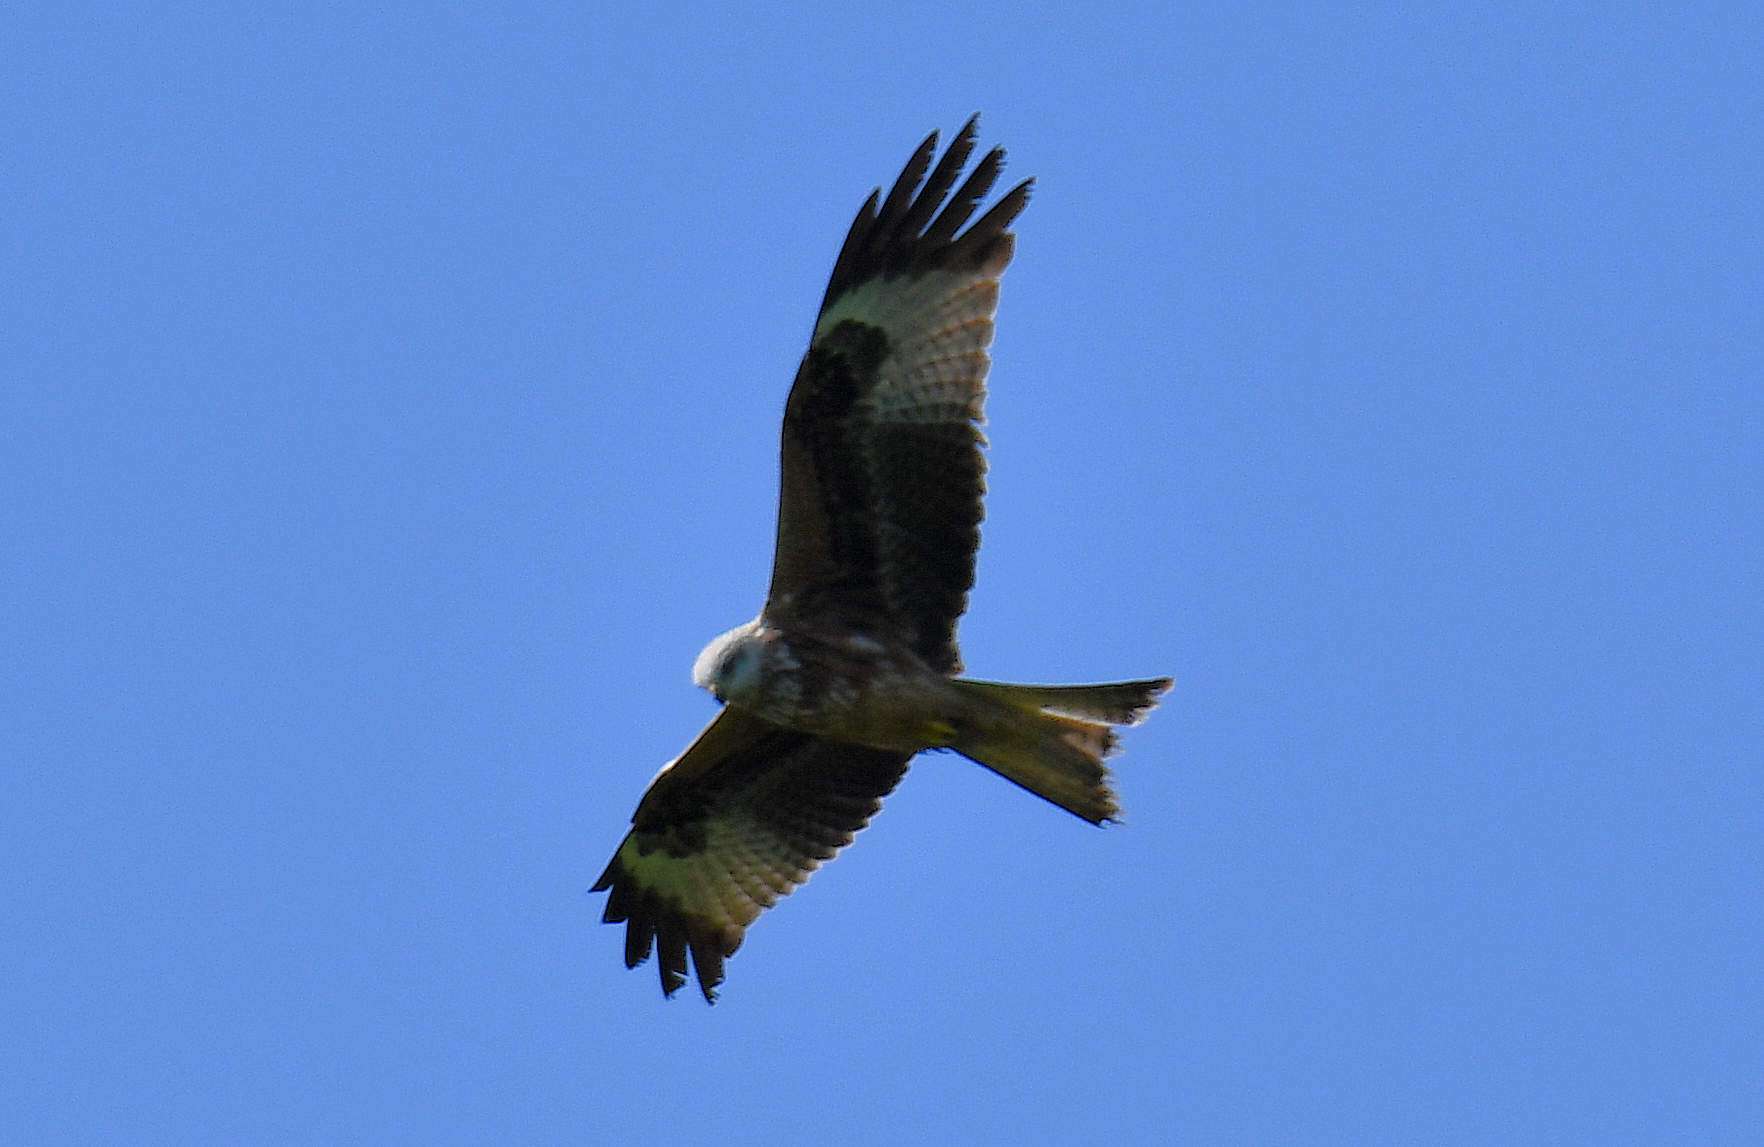 Red Kite by colin bray at Woodbury Common Devon